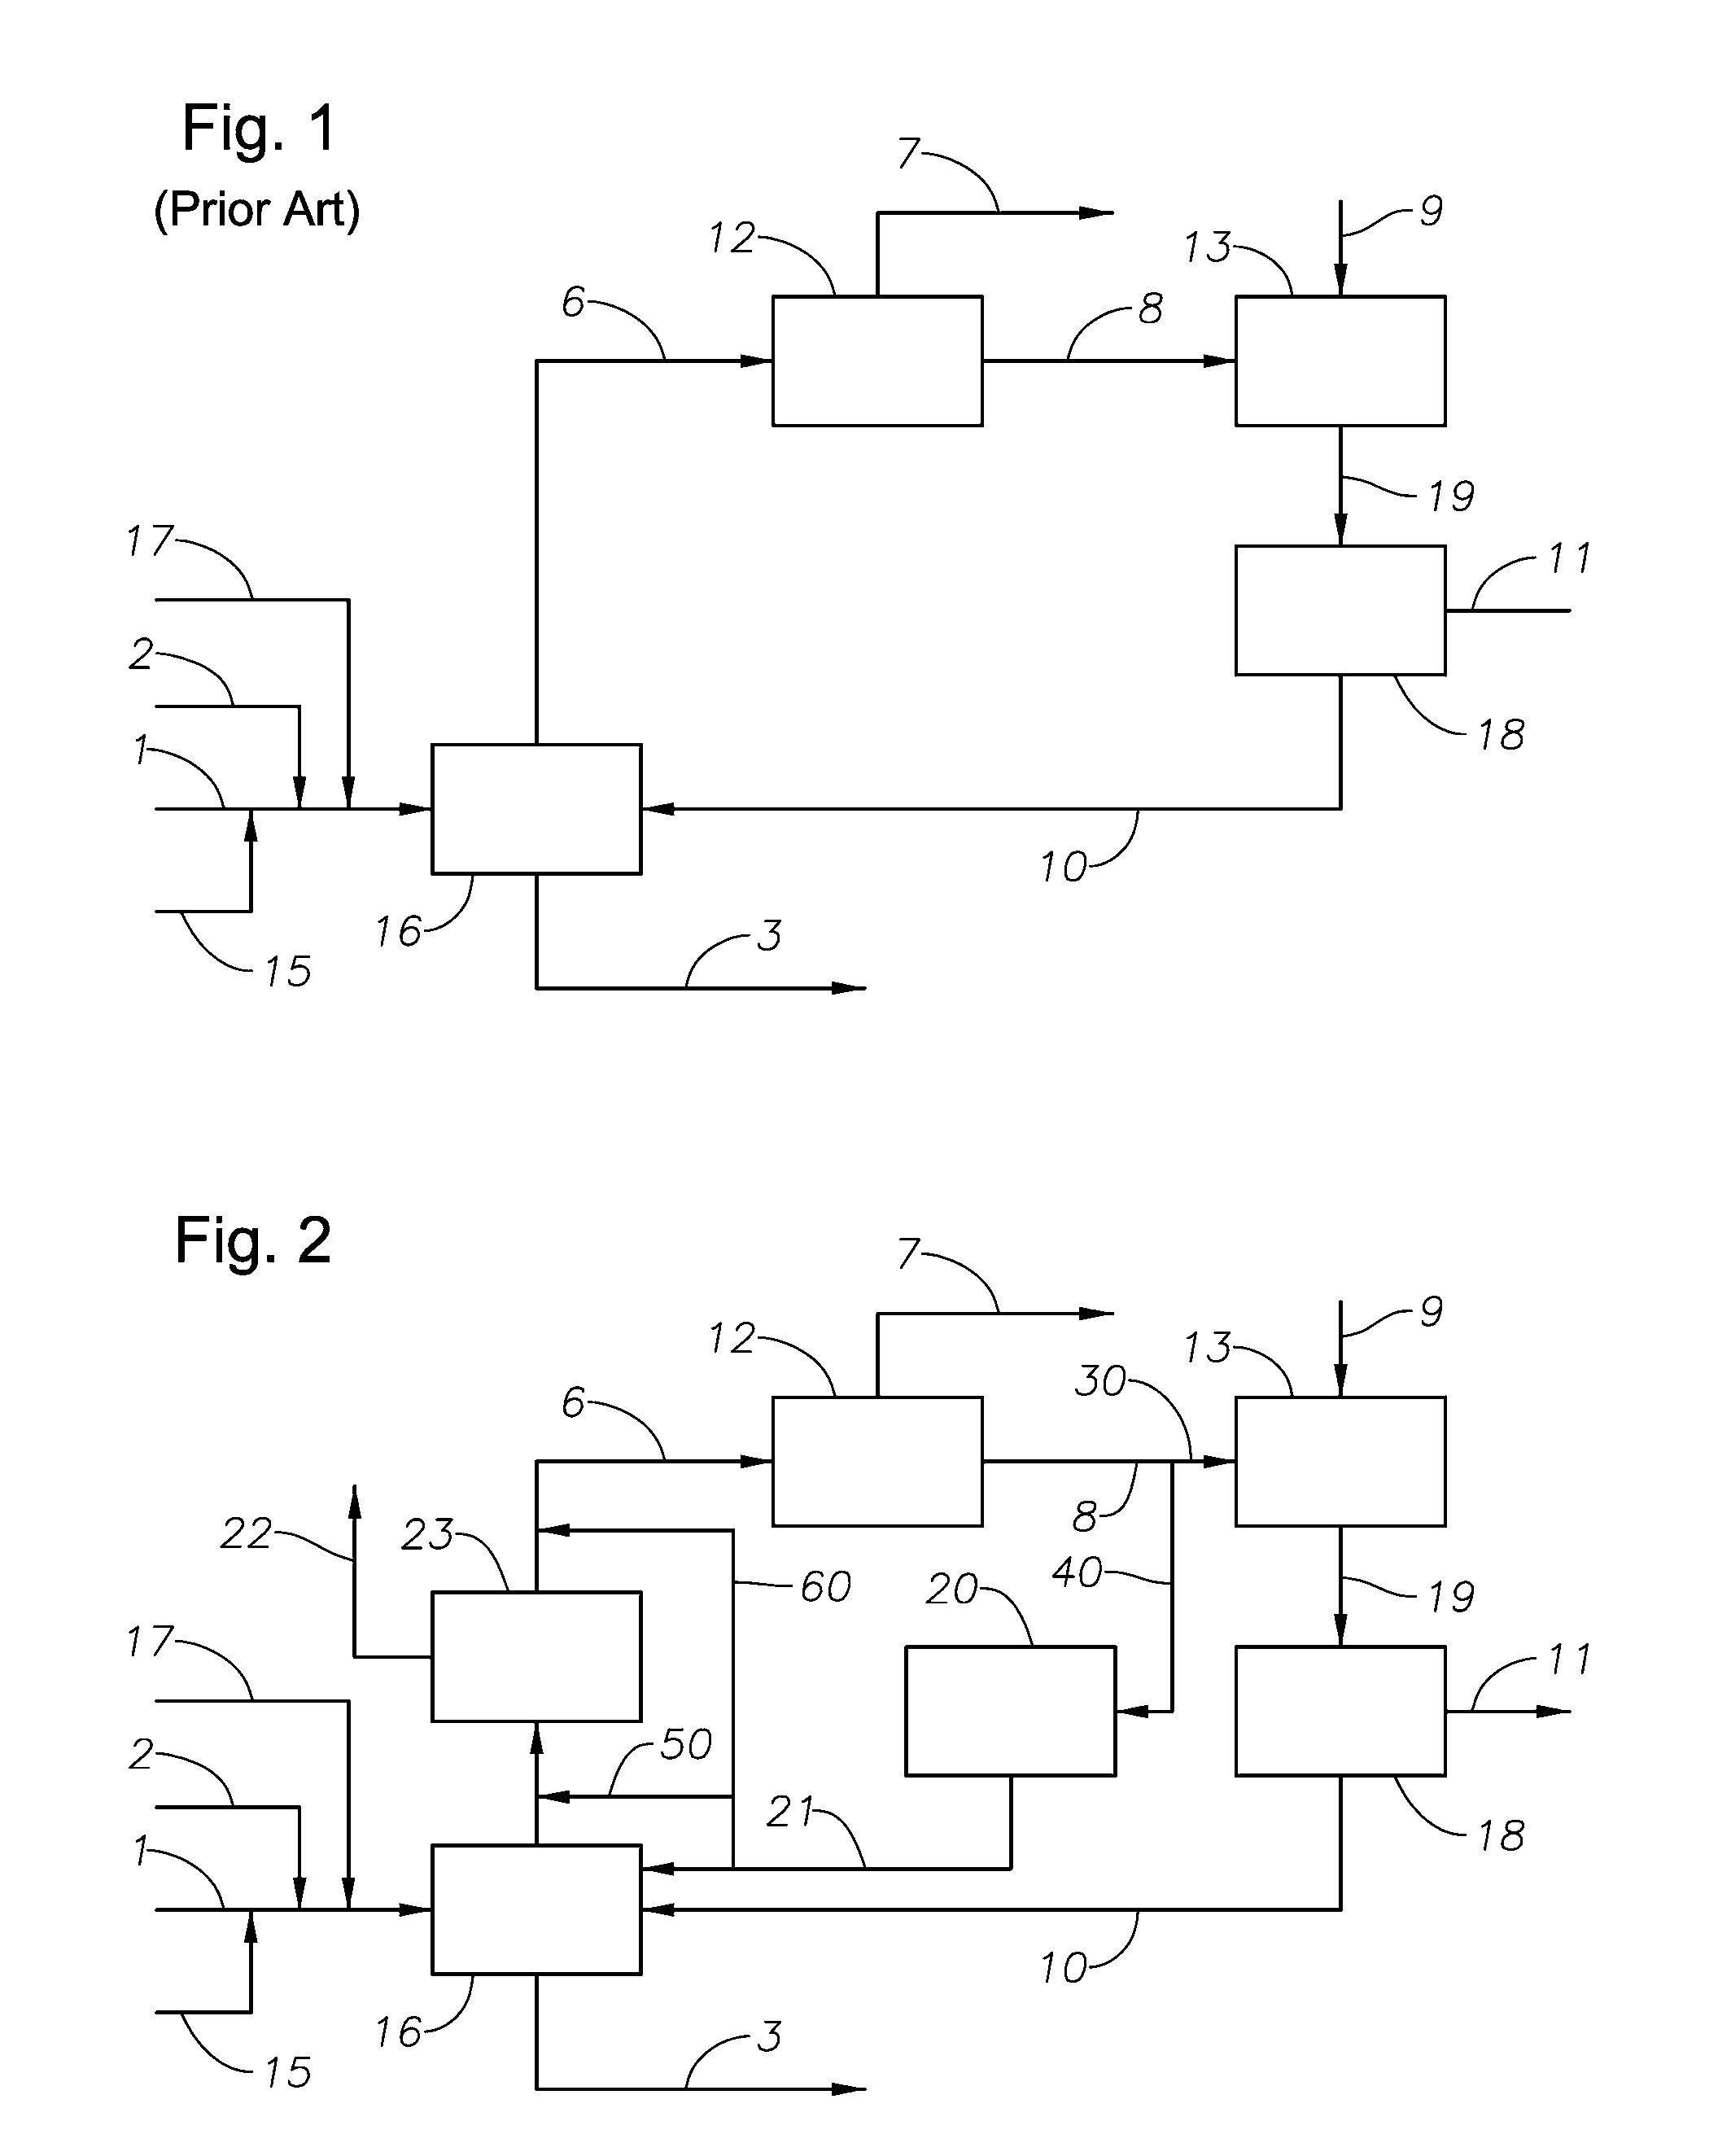 Process for the Production of Paraxylene